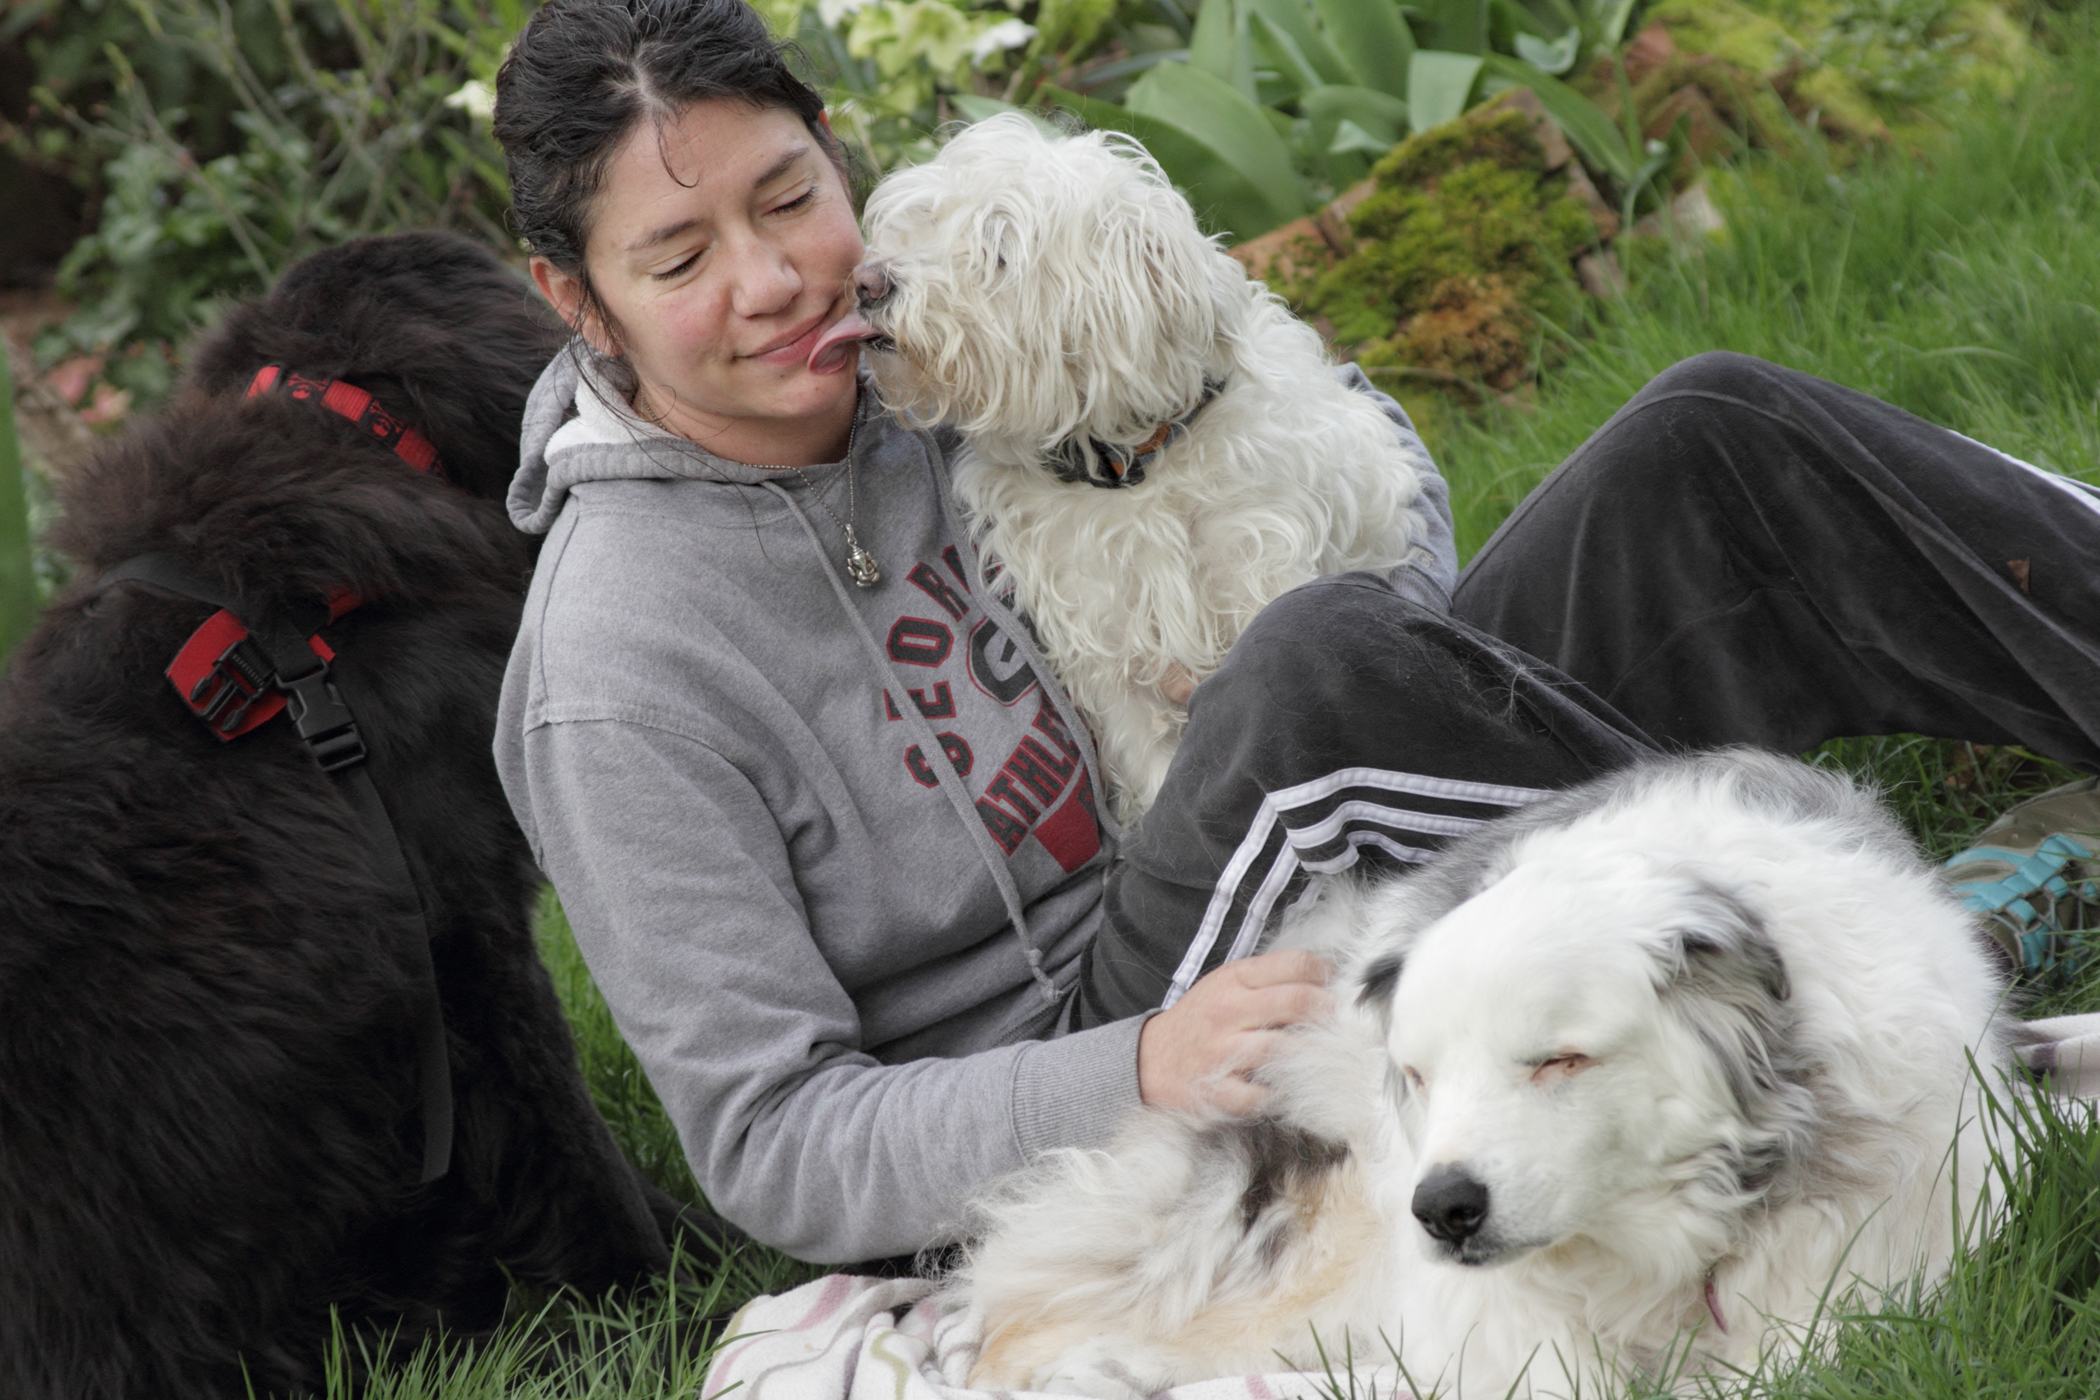 PHOTO: Owner Trisha is photographed with her dog "Magoo," a blind and deaf therapy dog.